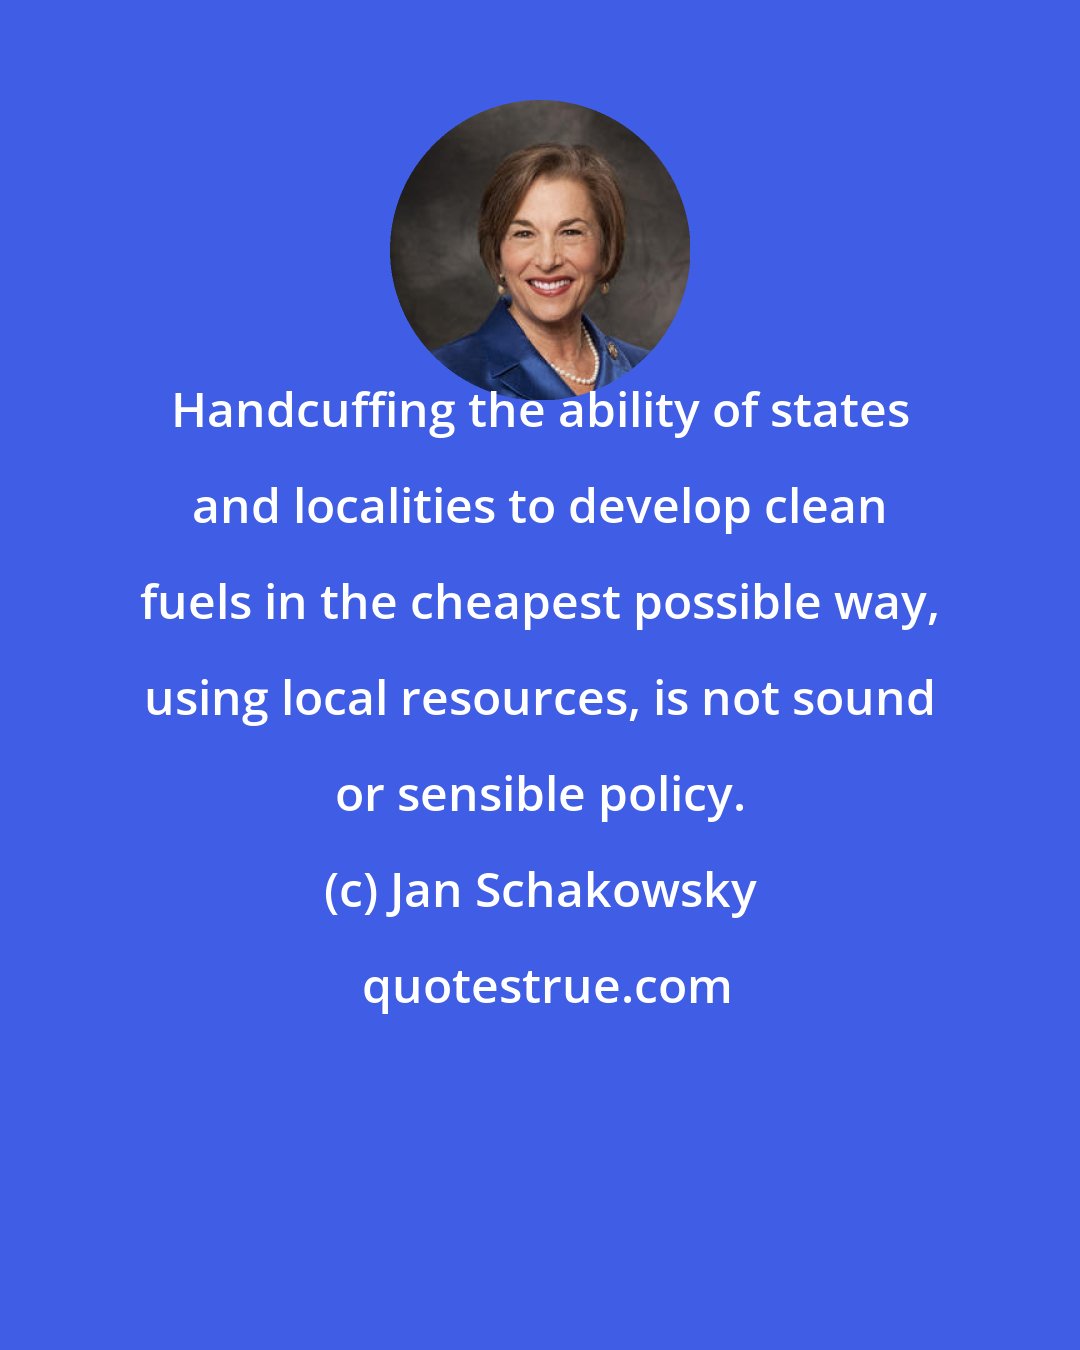 Jan Schakowsky: Handcuffing the ability of states and localities to develop clean fuels in the cheapest possible way, using local resources, is not sound or sensible policy.